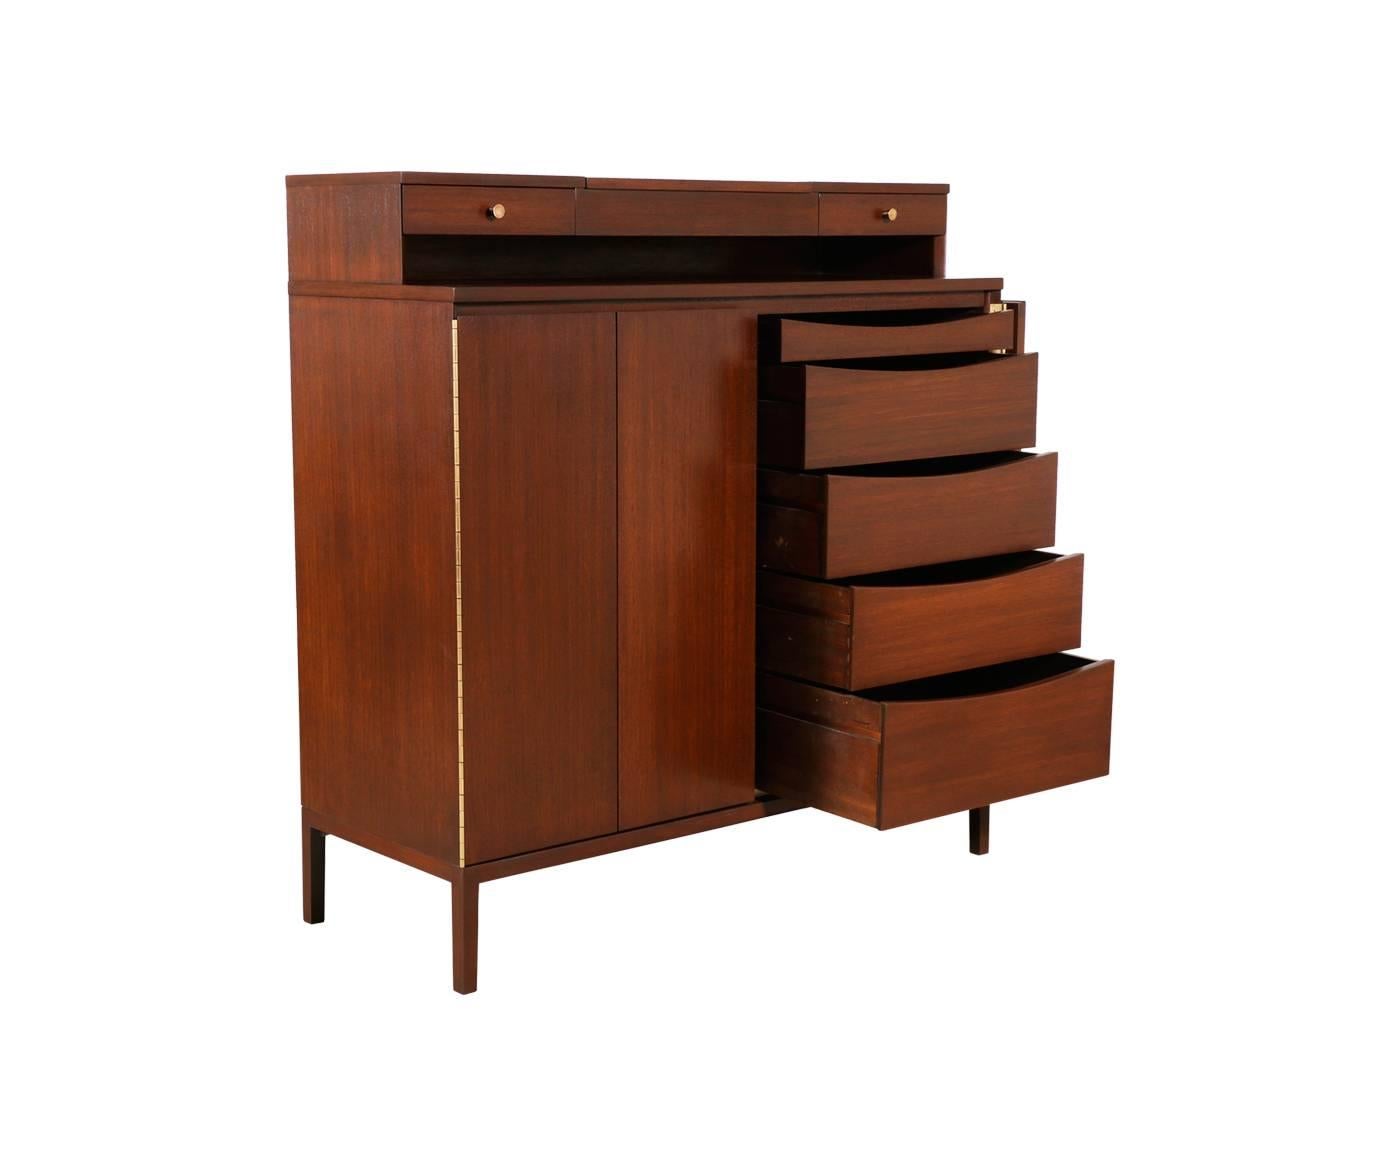 Mid-20th Century Paul McCobb “Irwin Collection” Bachelors Chest with Bi-Folding Doors for Calvin